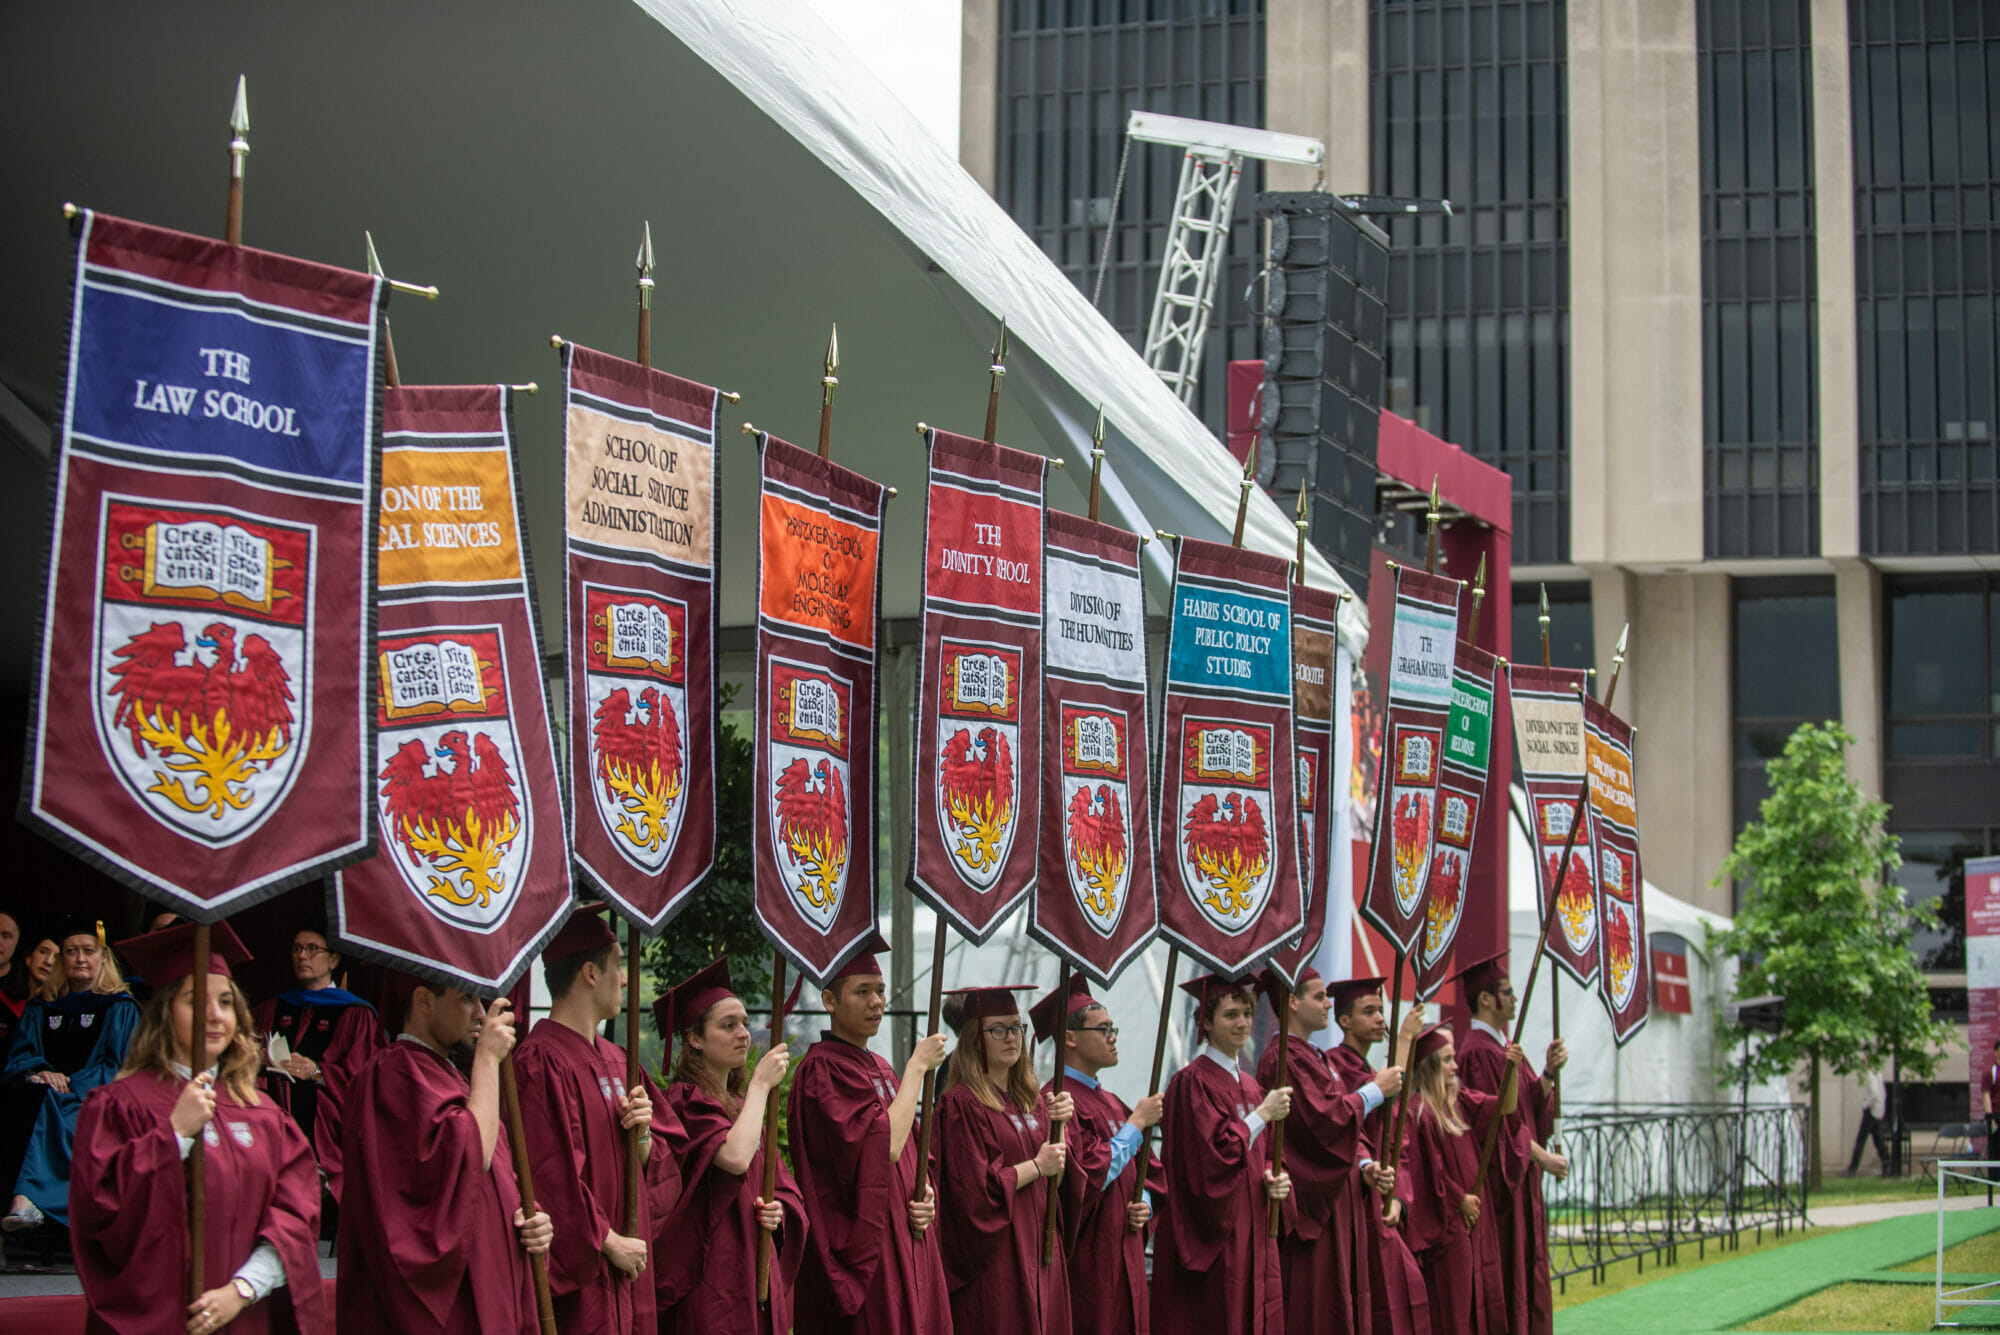 Students in graduation robes hold banners representing each graduate school